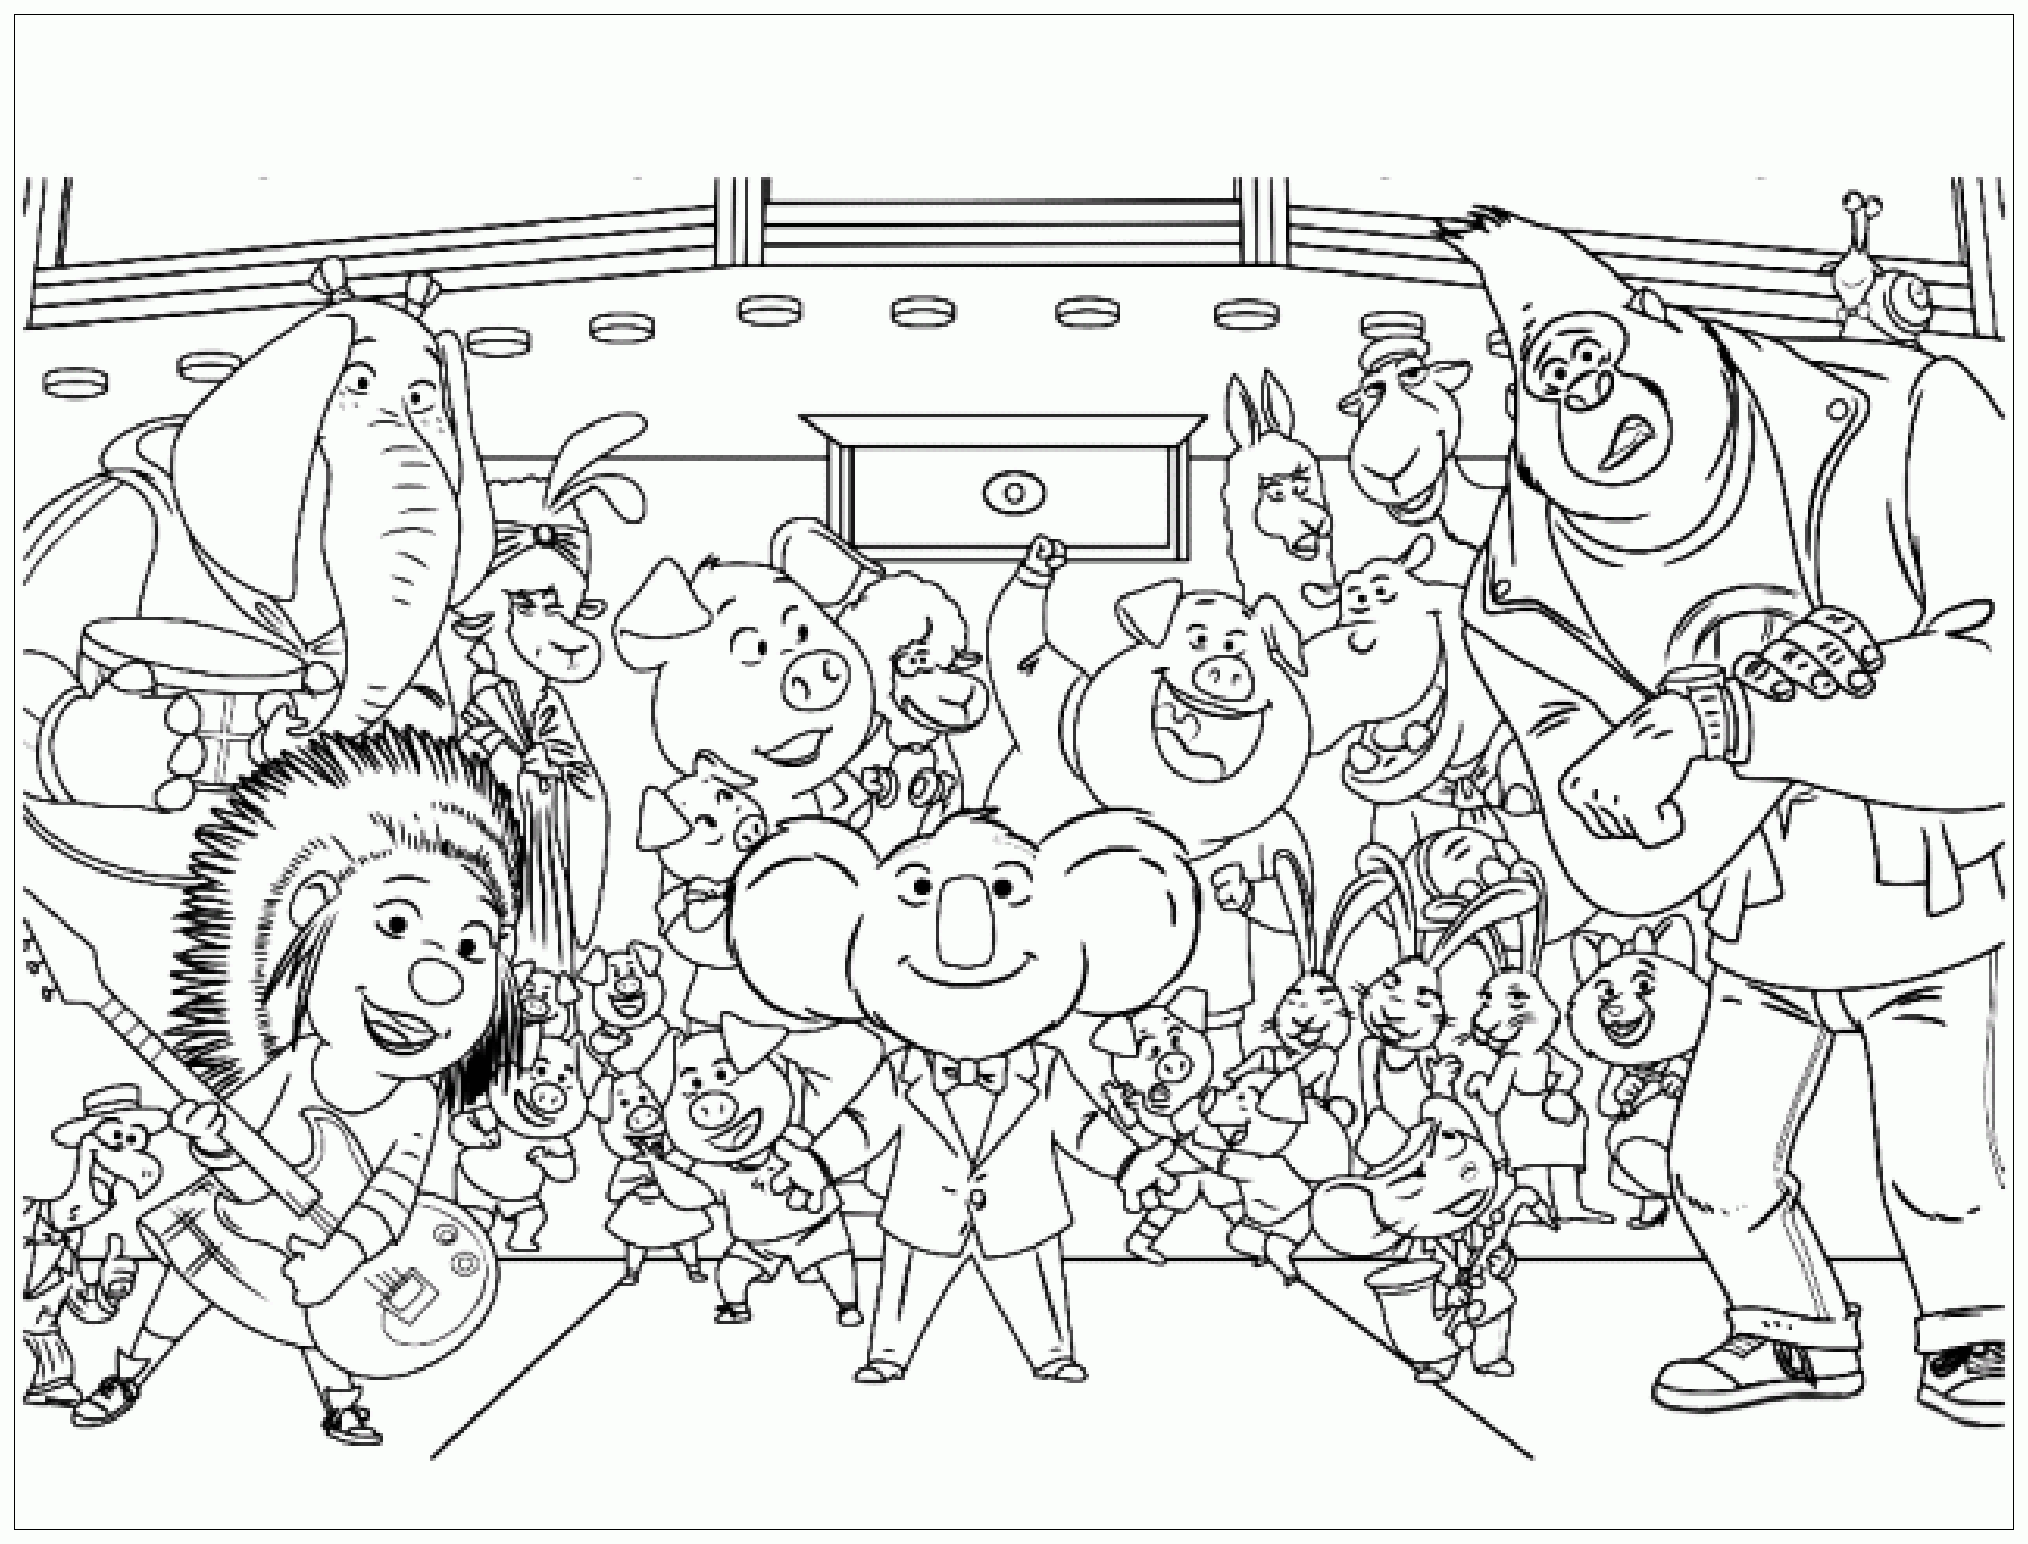 Incredible Coloriage of All in the scene, simple, for children